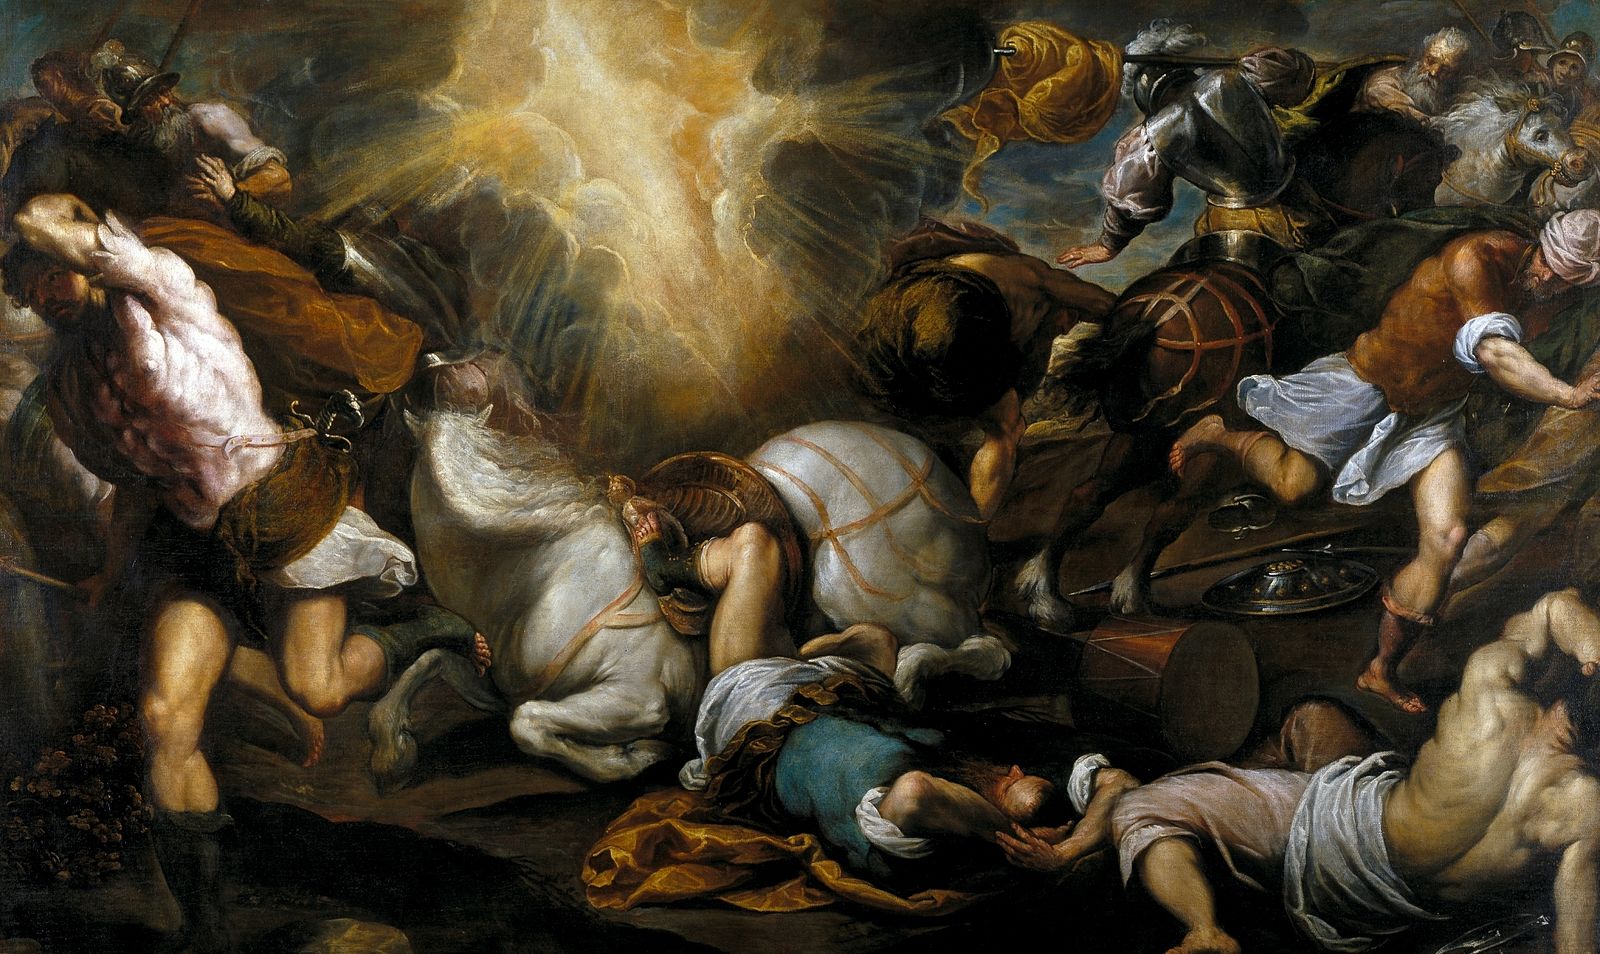 Painting of the Conversion of St. Paul by Palma il Giovane (~1590)